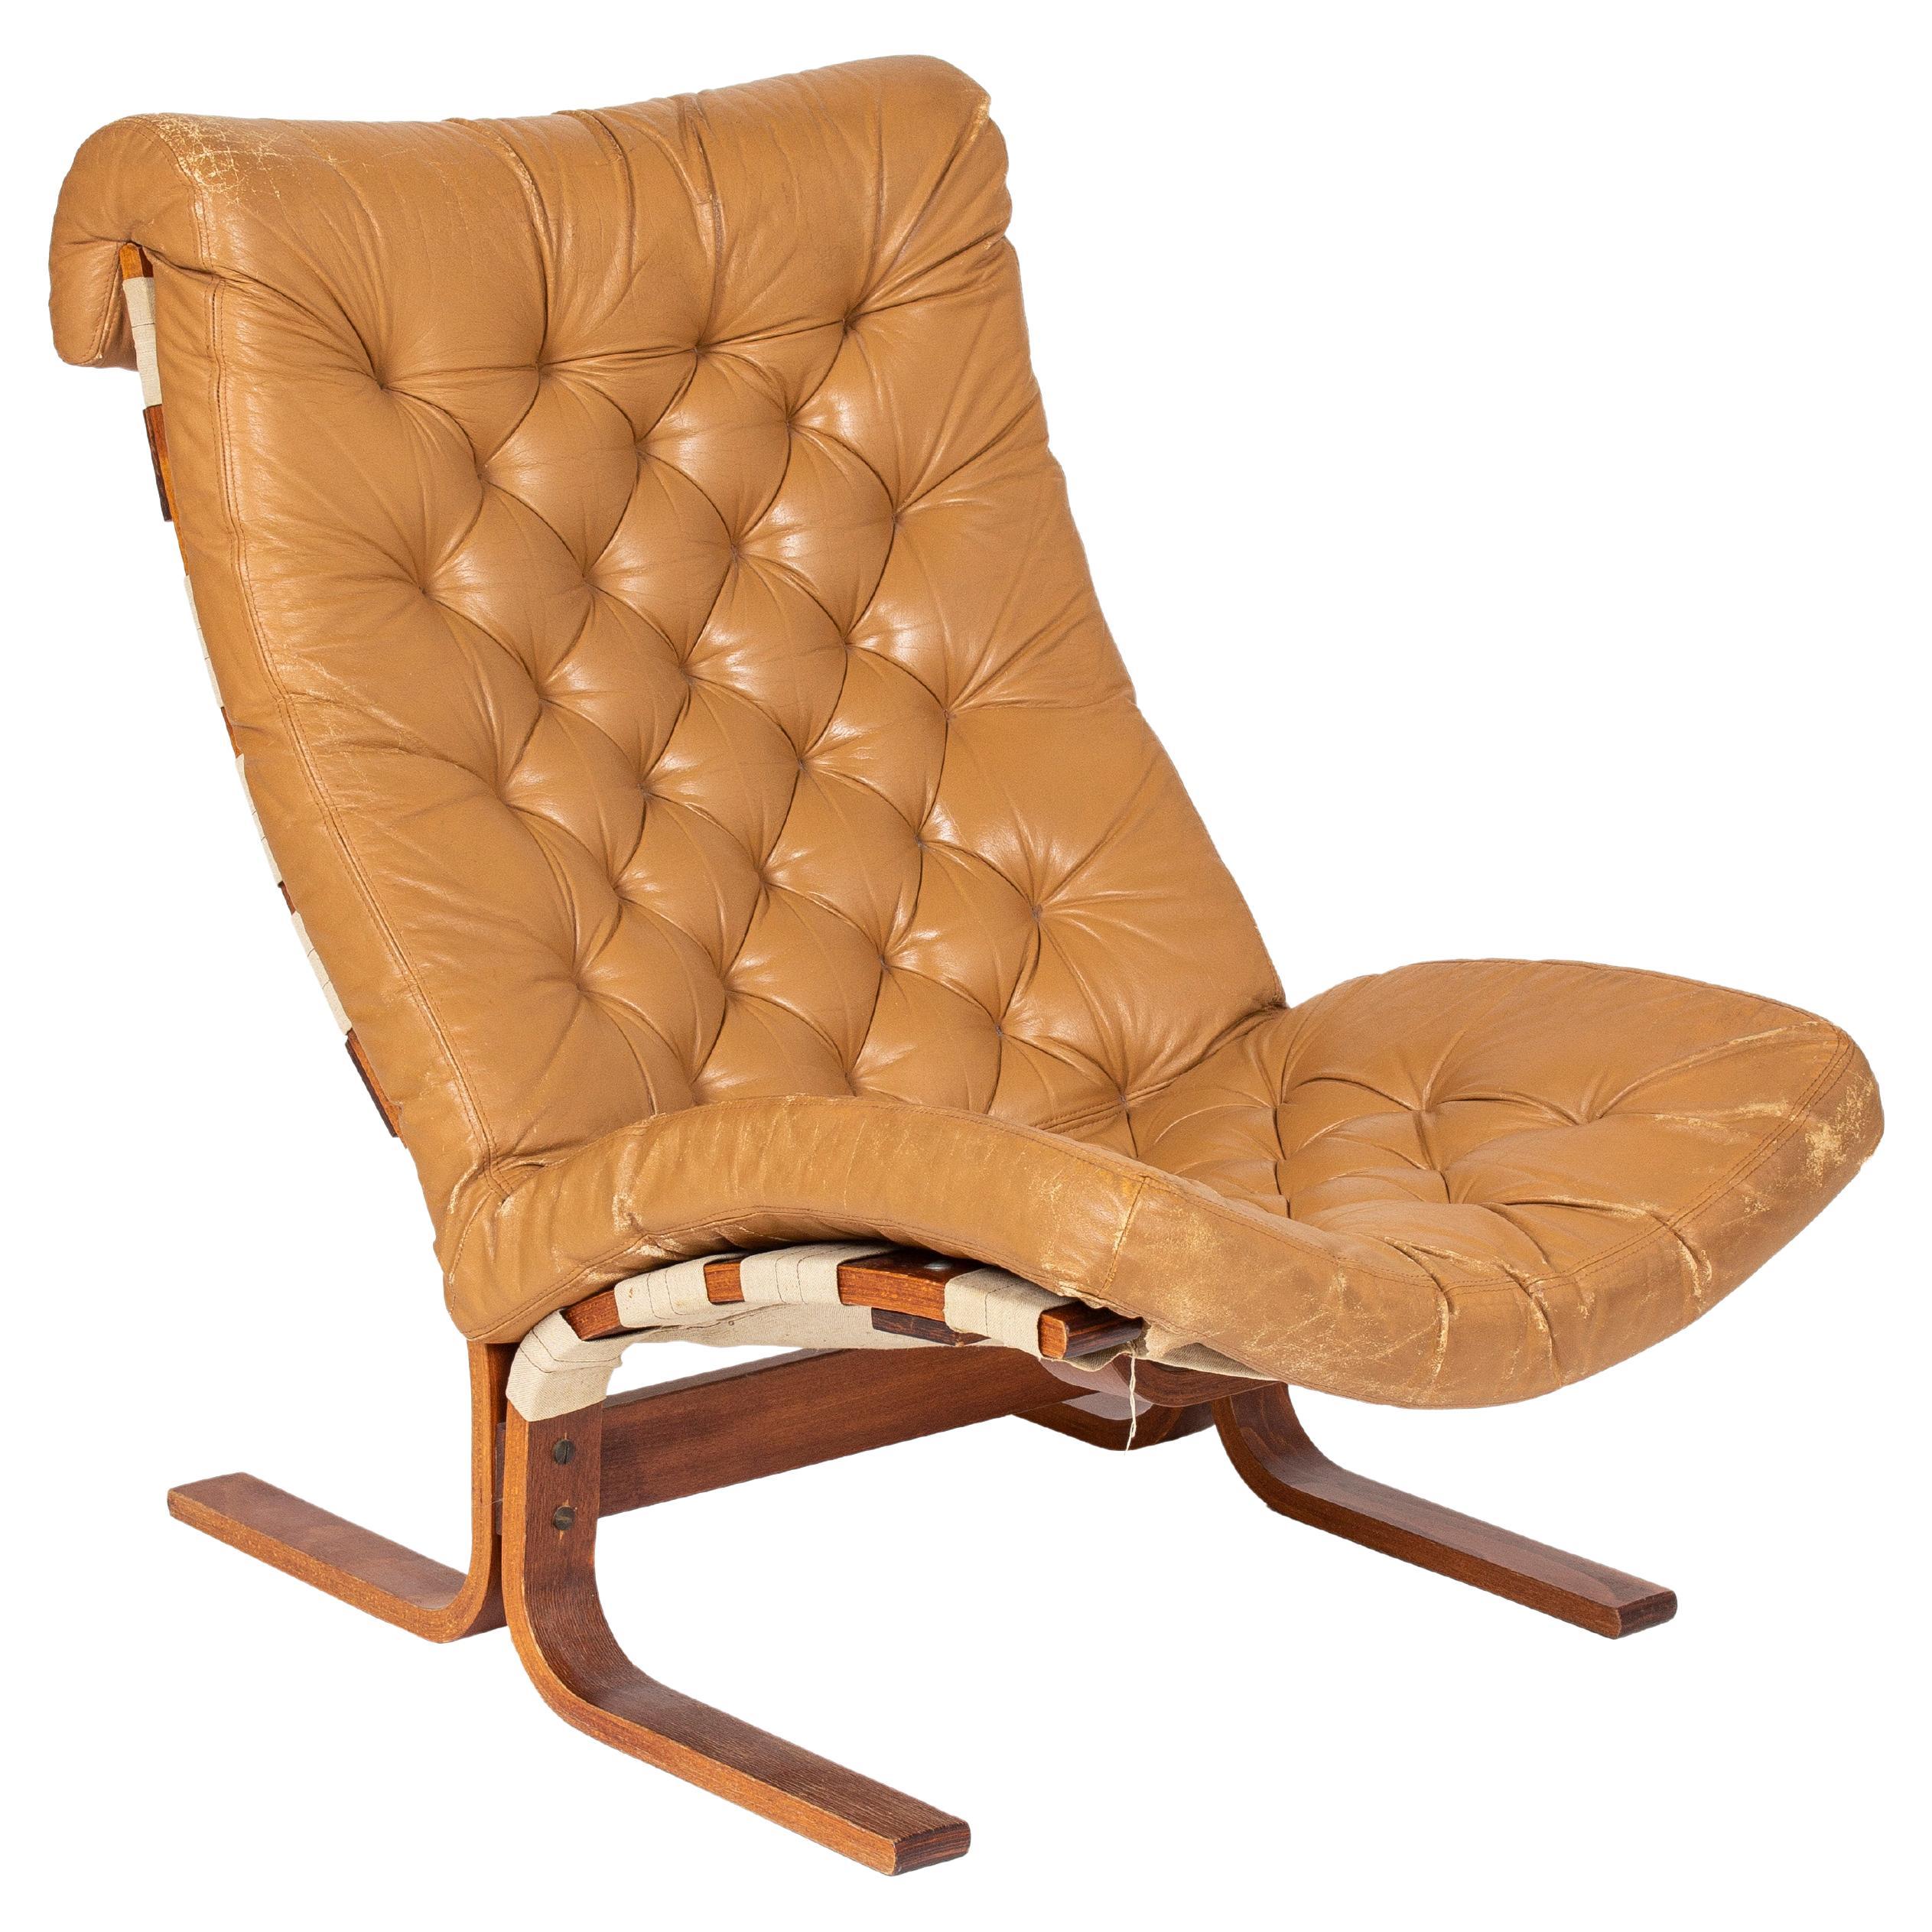 Iconic chairs attributed to Ingmar Relling.

The 